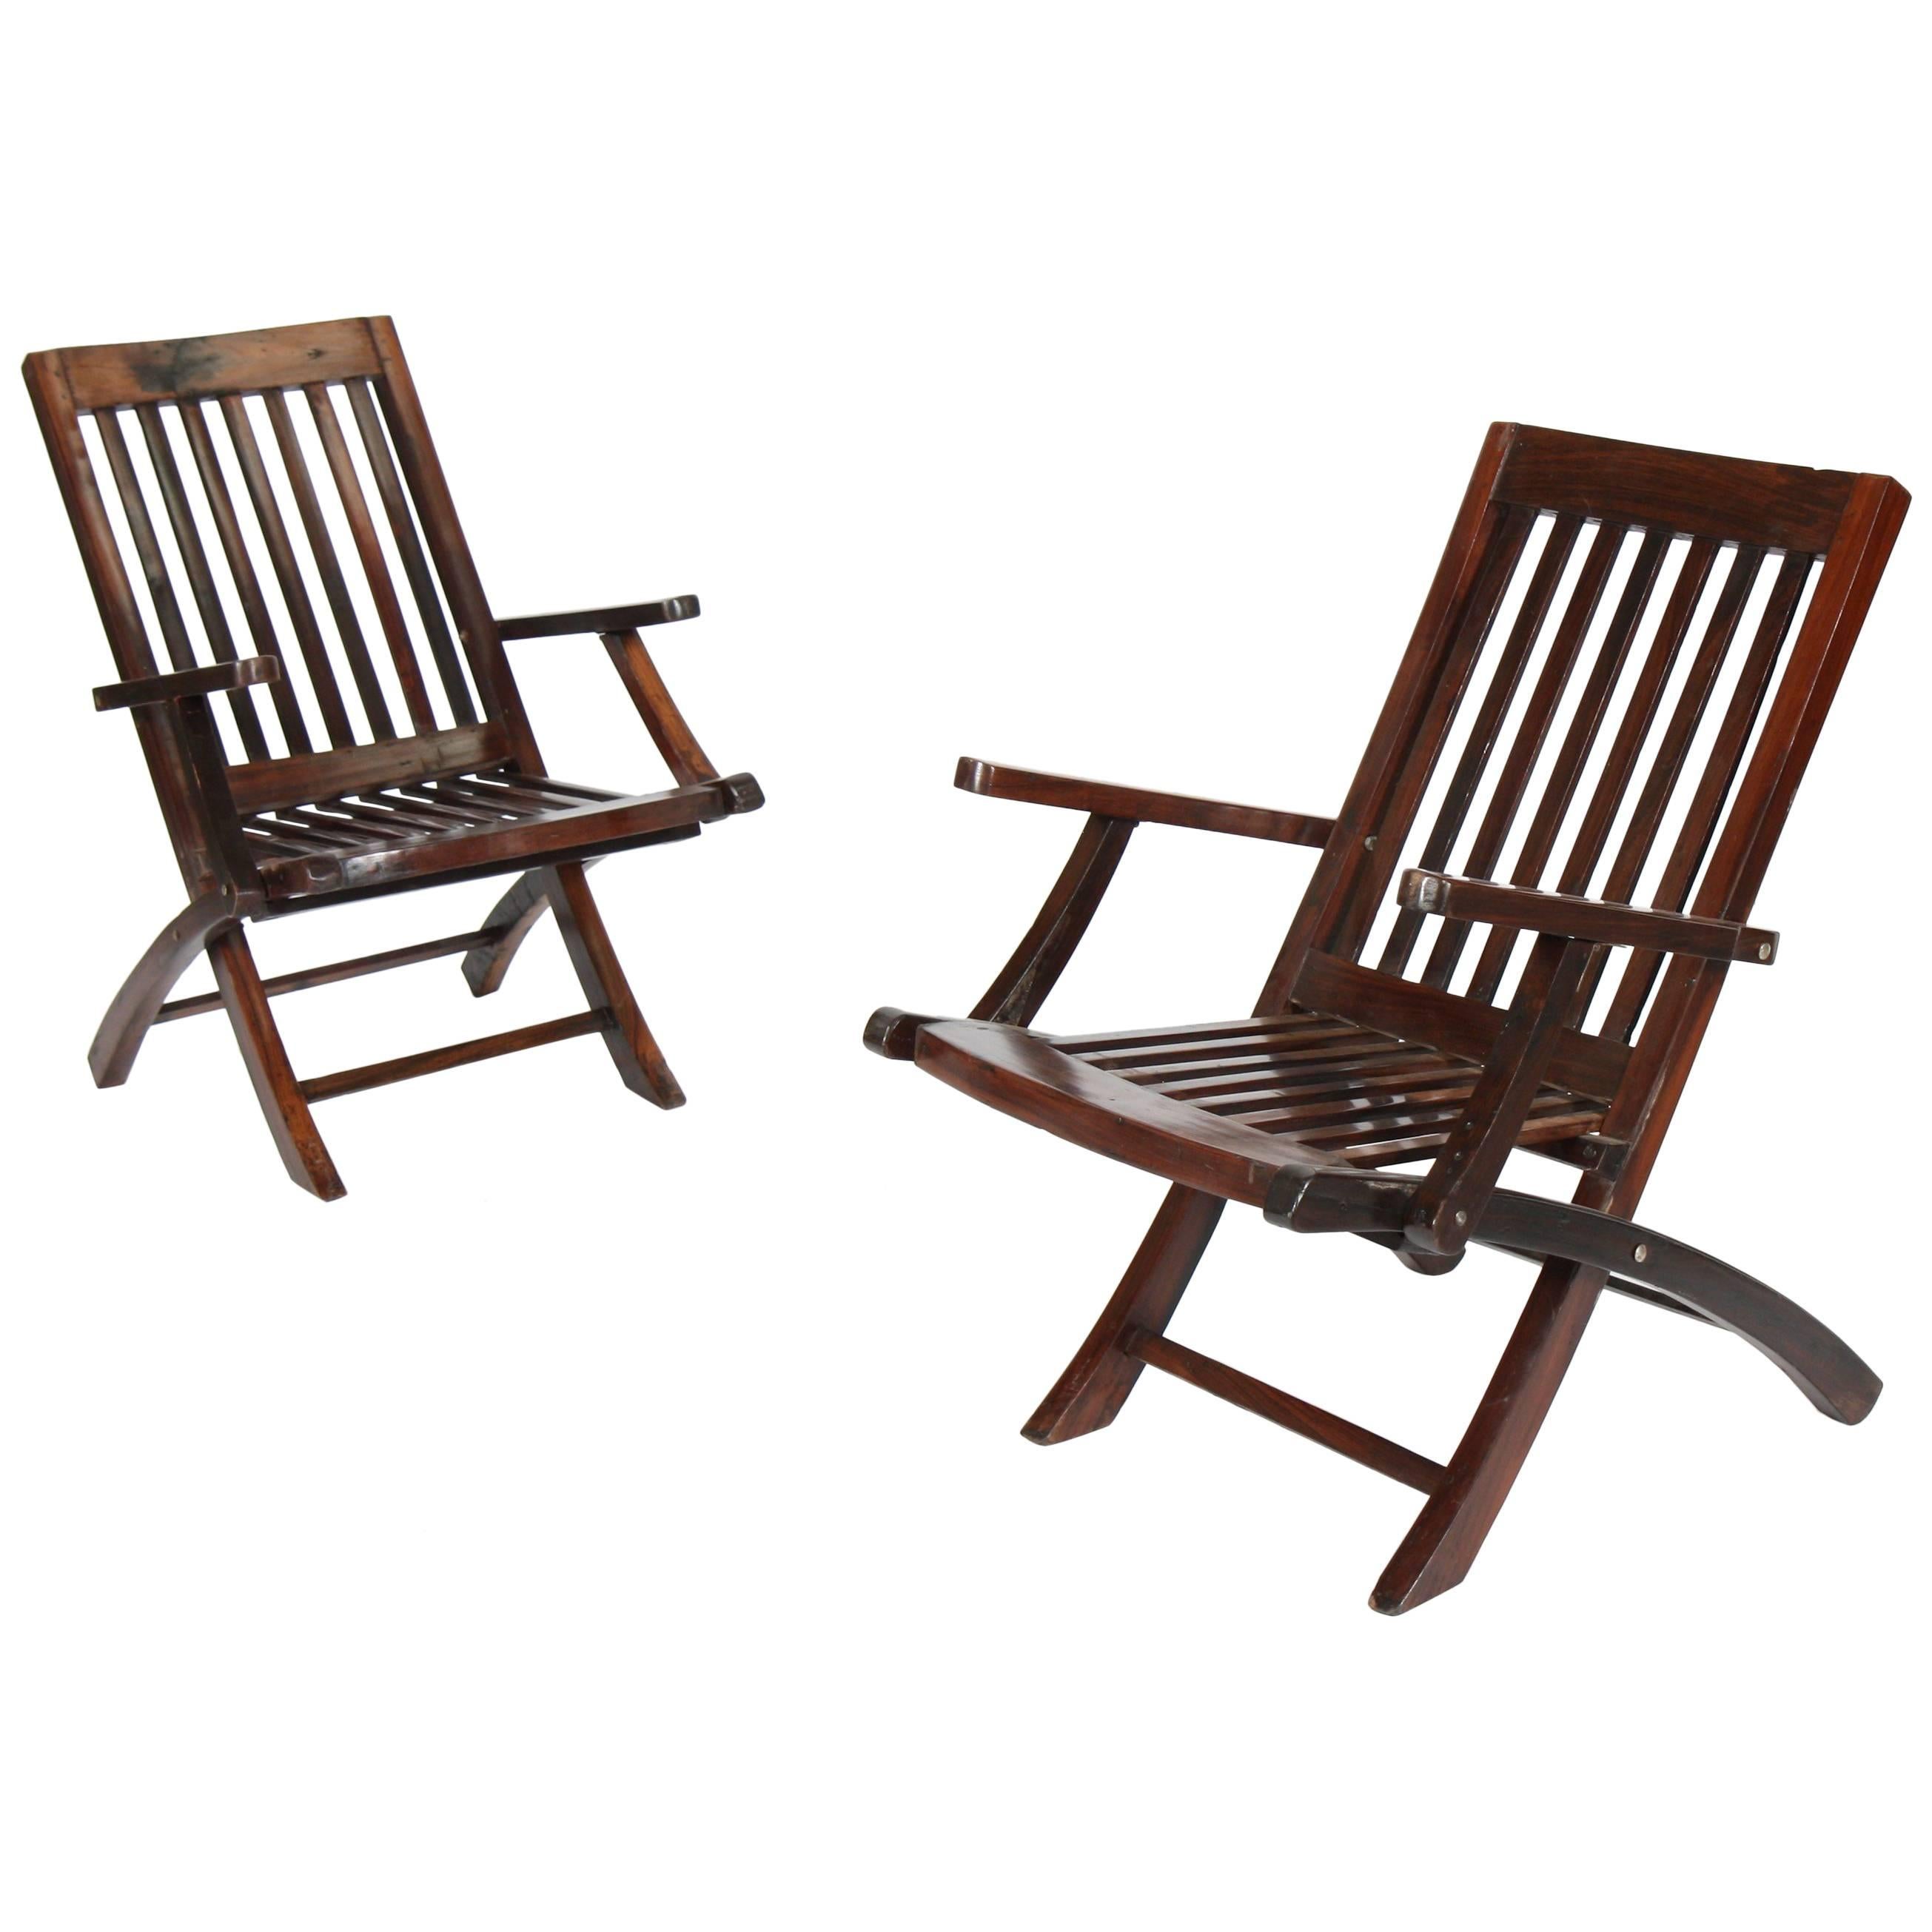 Pair of Rosewood Deck Armchairs